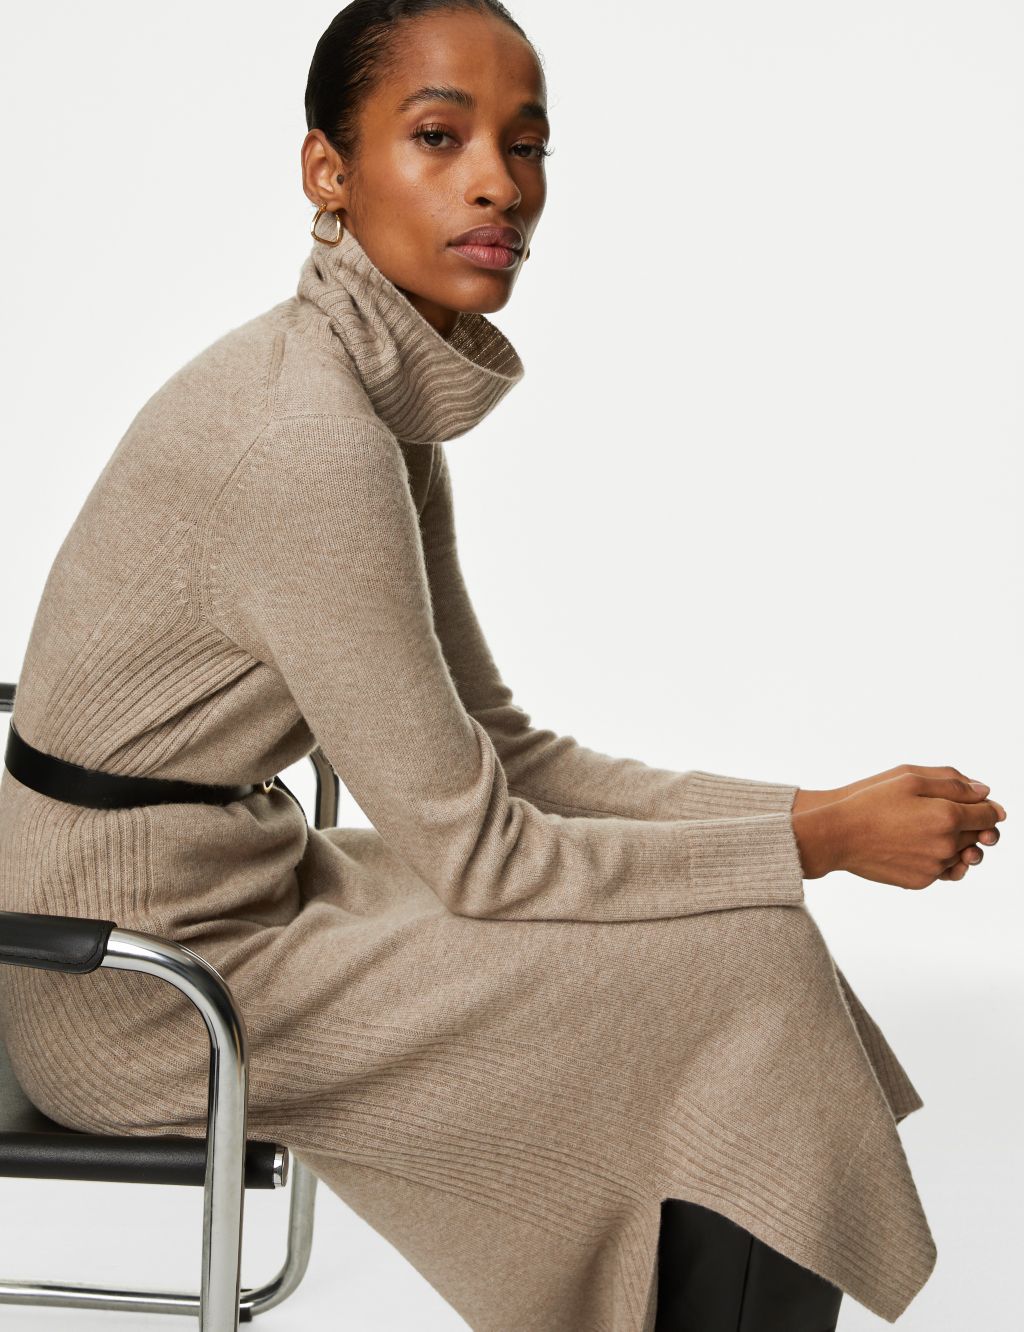 Merino Wool Rich Knitted Dress with Cashmere image 3